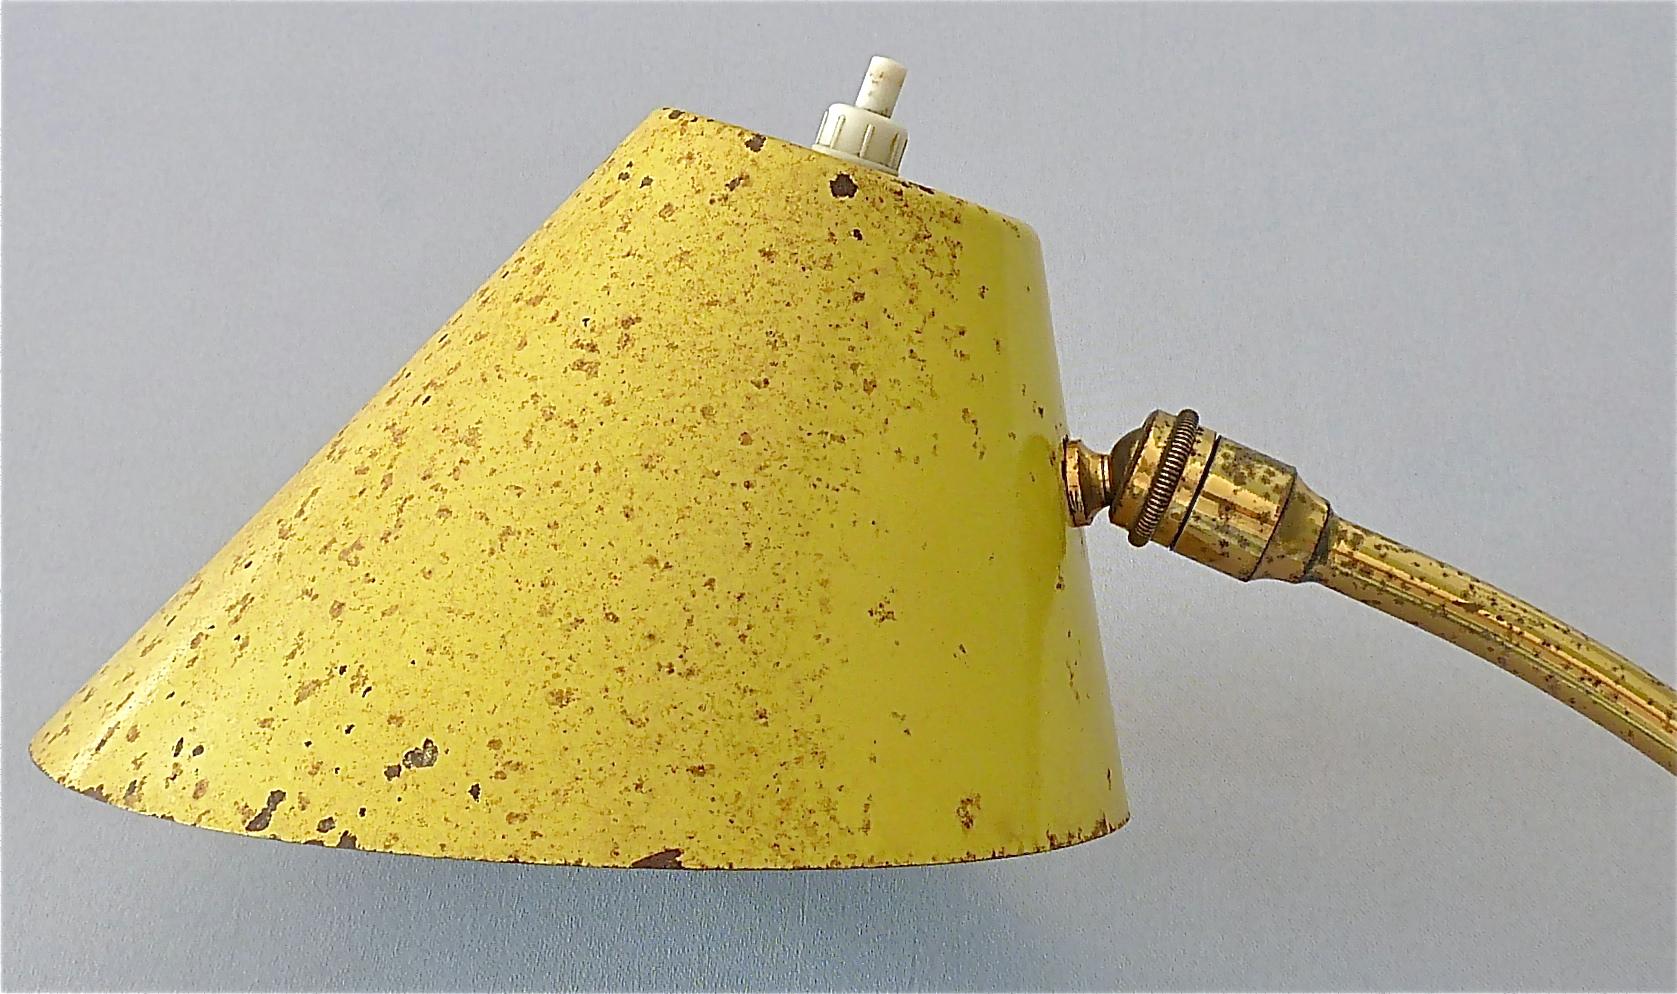 Rare Robert Mathieu Pierre Guariche French Table Wall Lamp Brass Yellow, 1950s For Sale 4